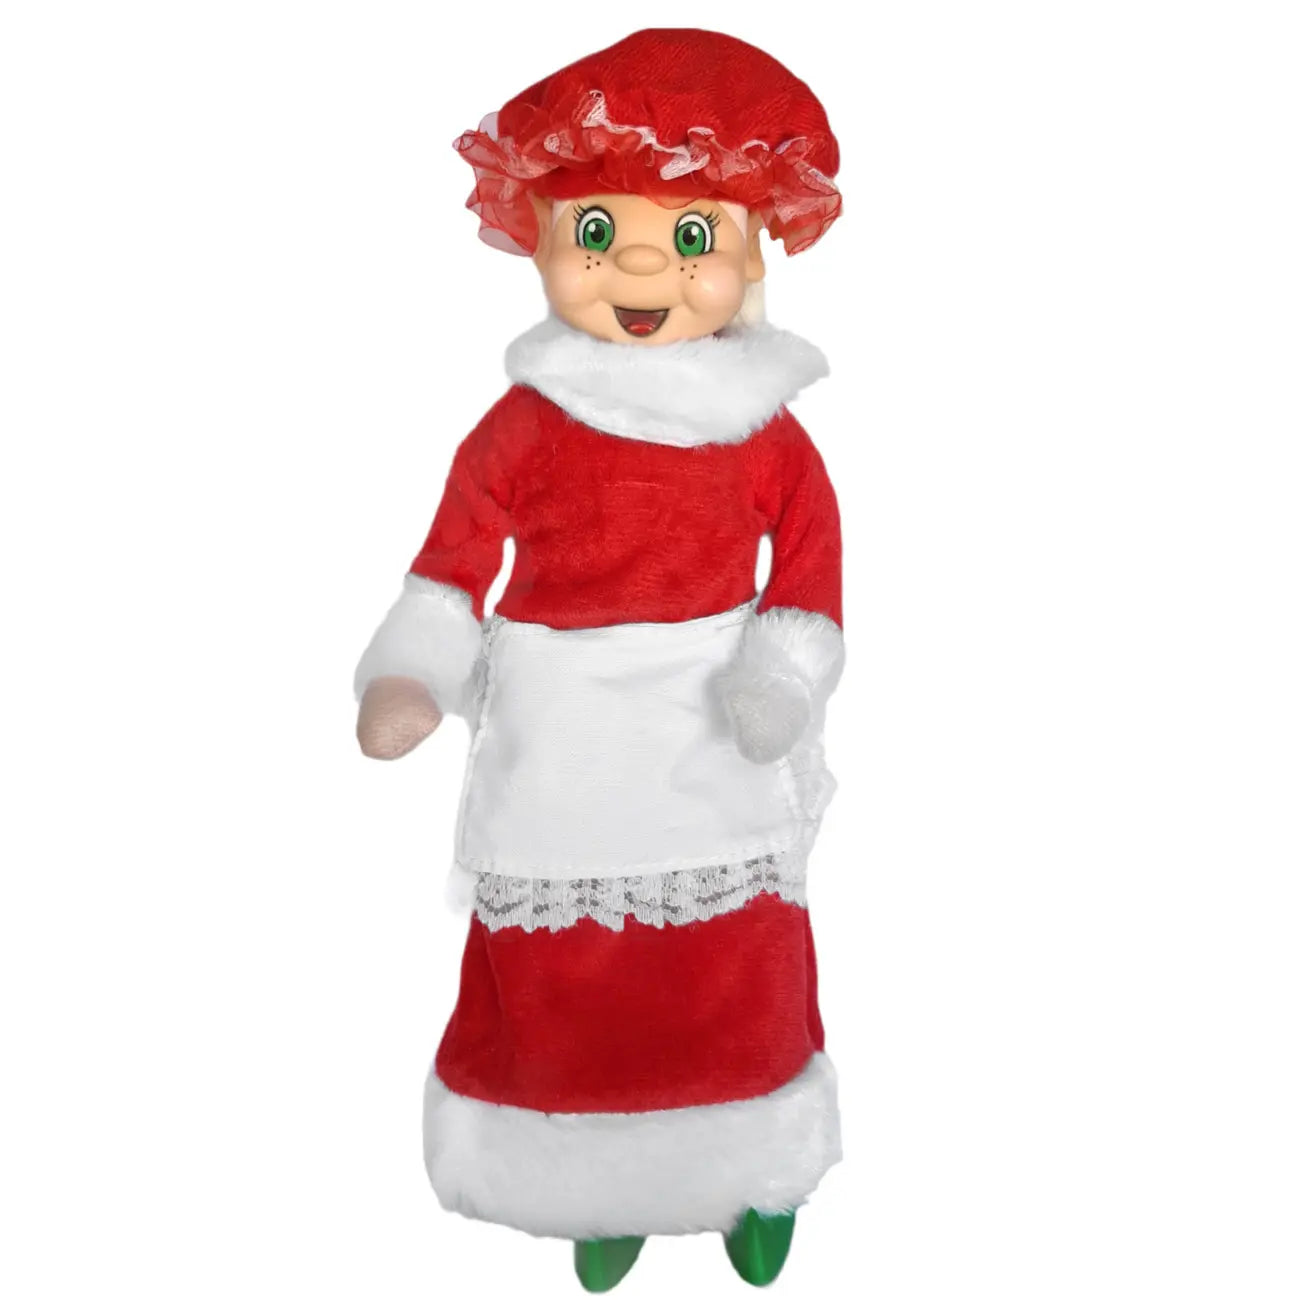 Elf wearing a mrs claus outfit